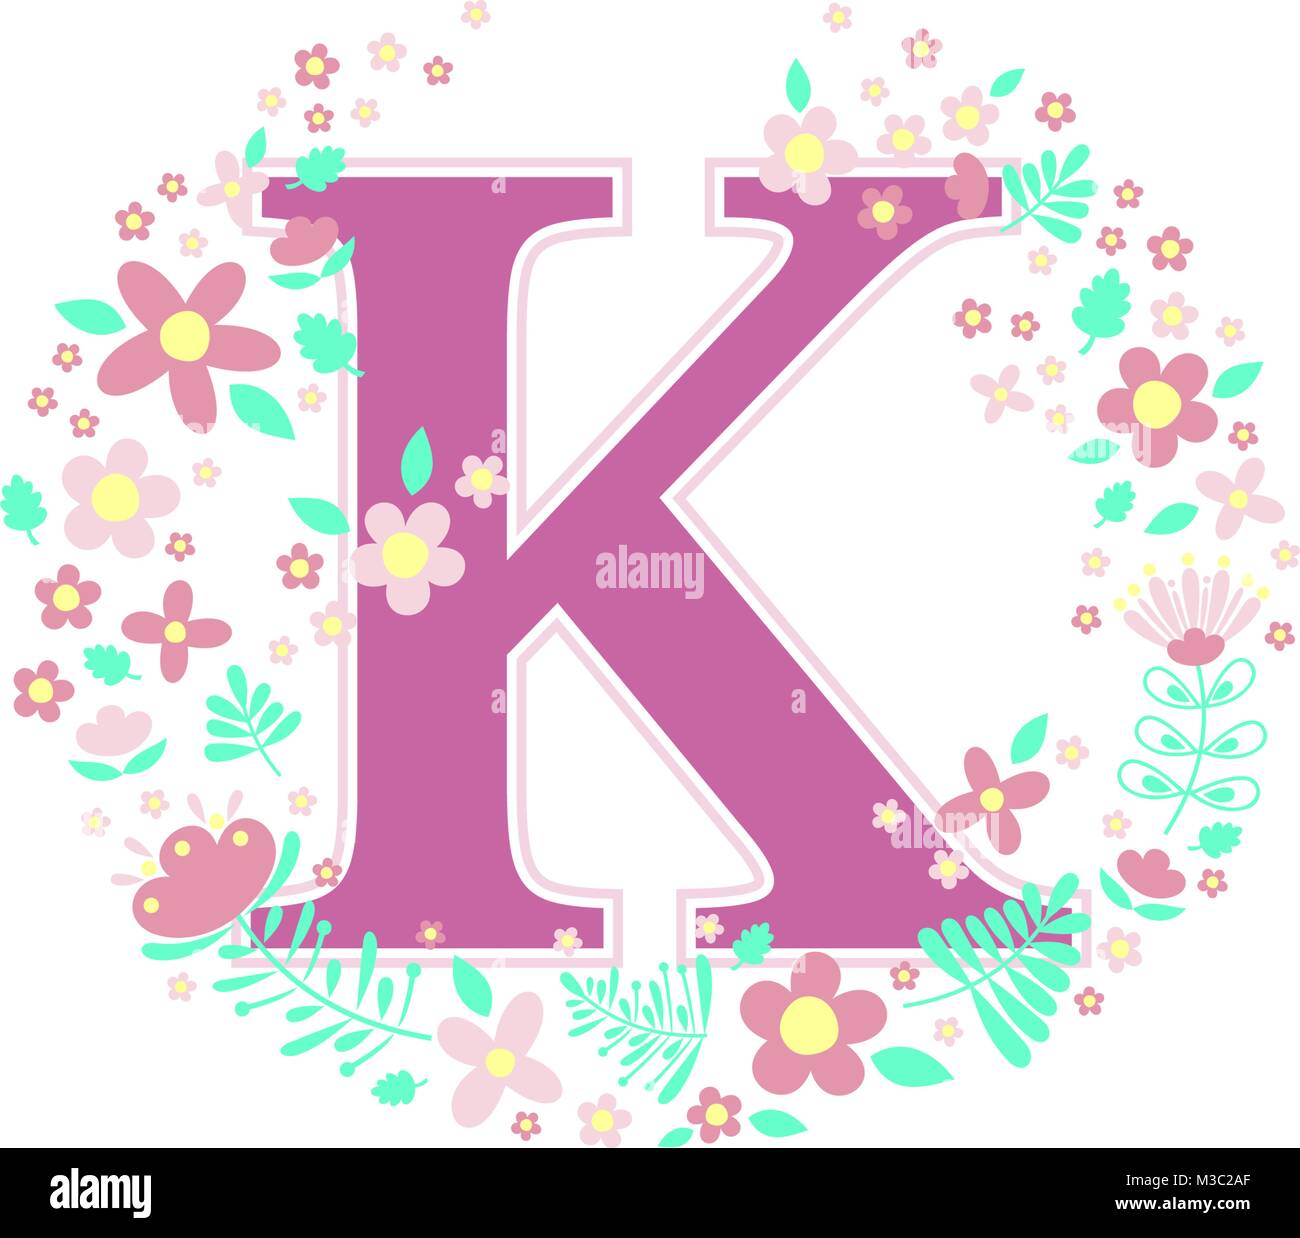 initial letter k with decorative flowers and design elements isolated on white background. can be used for baby name, nursery decoration, spring theme Stock Vector